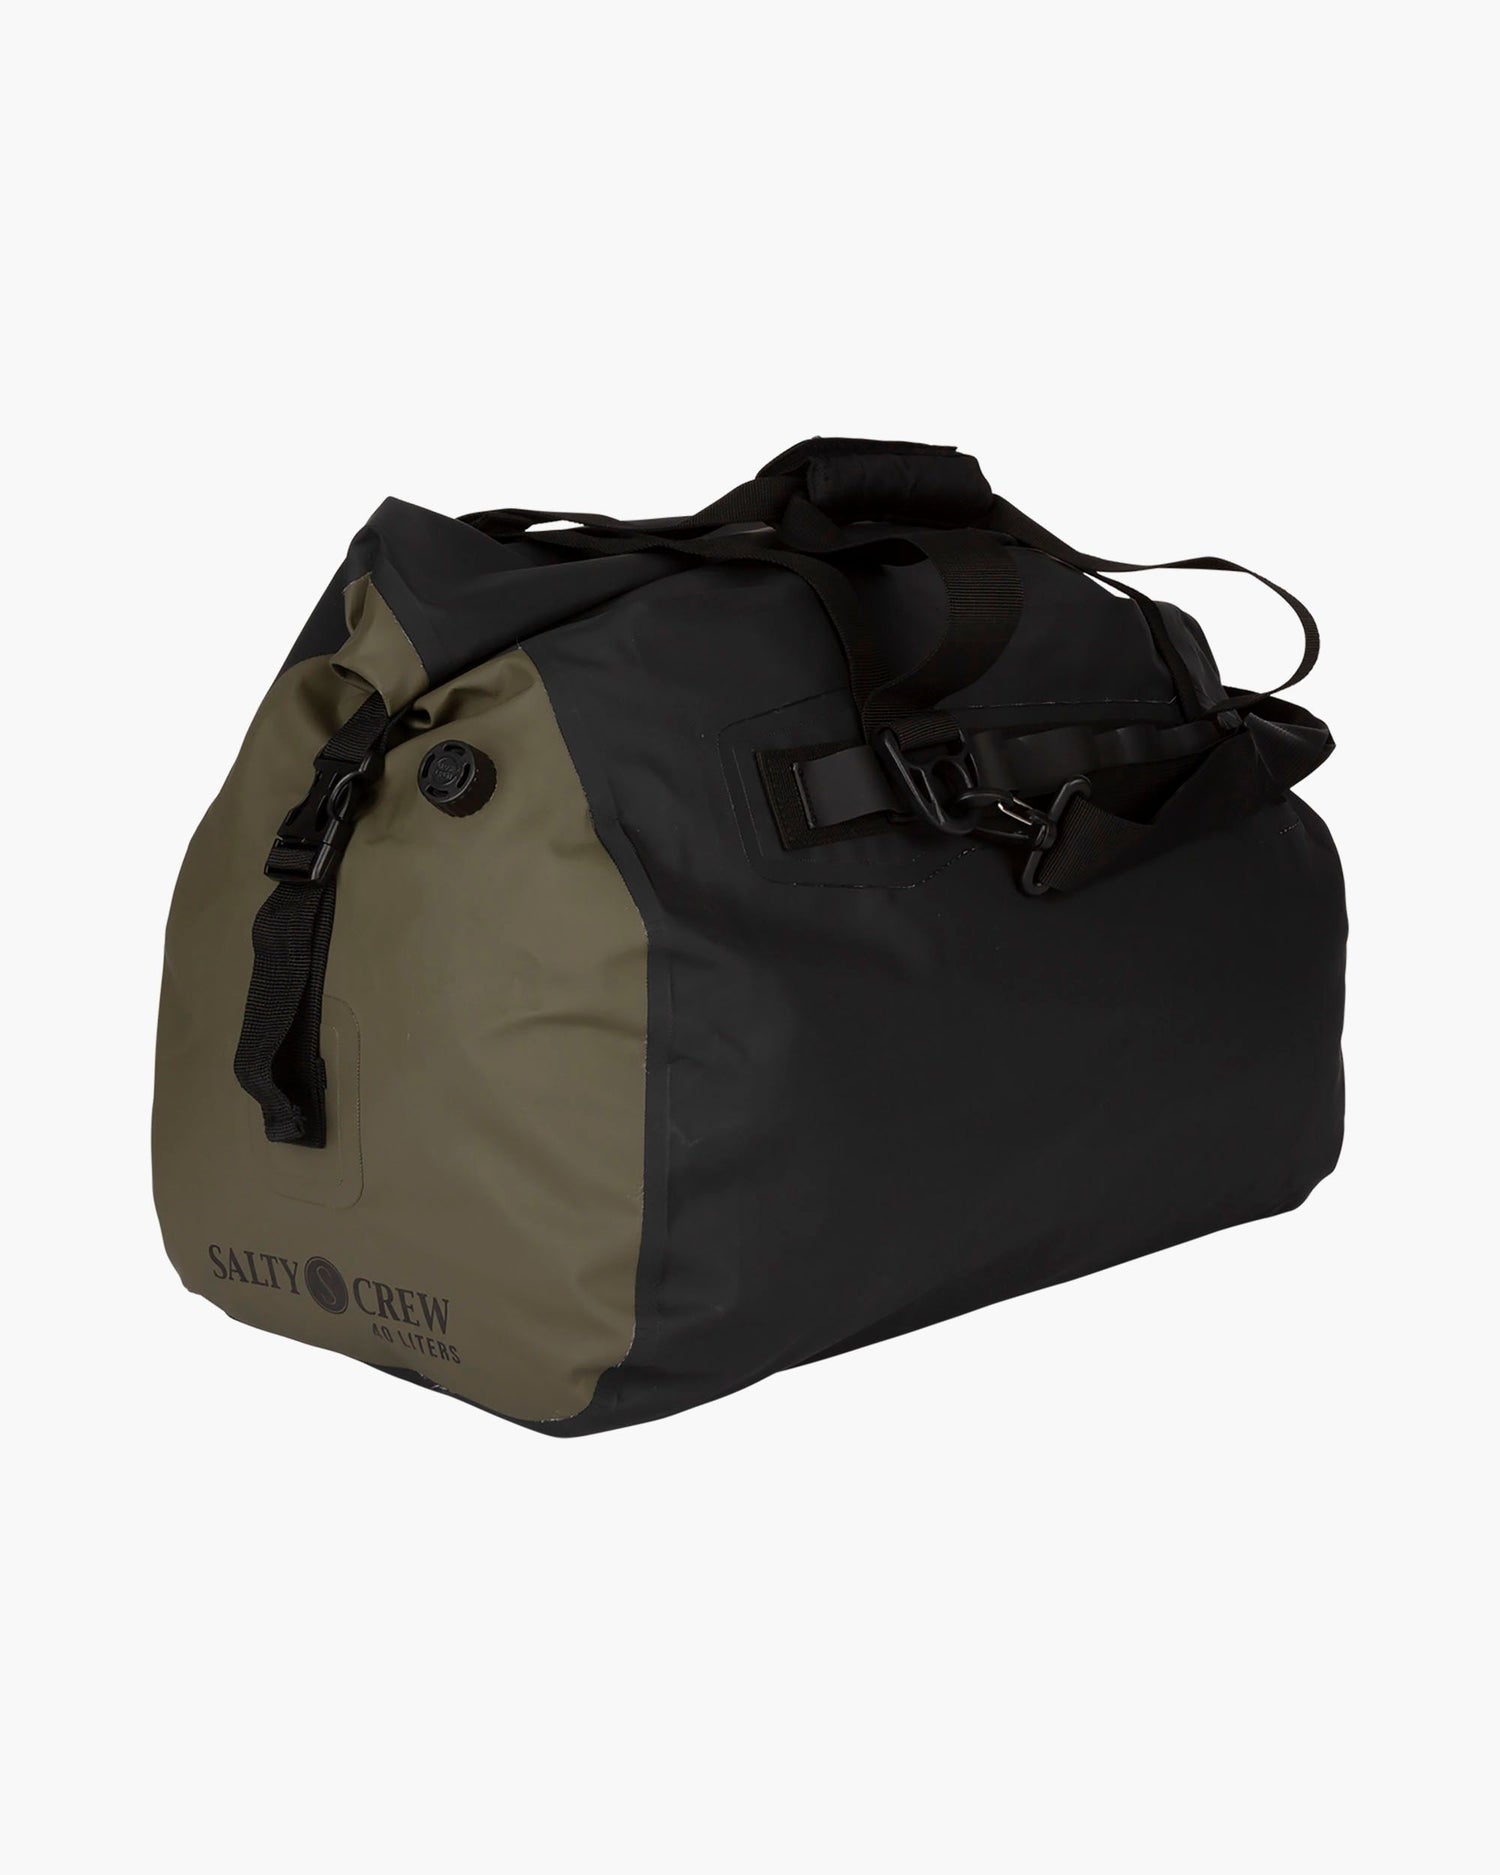 Side angle of VOYAGER DUFFLE black/military